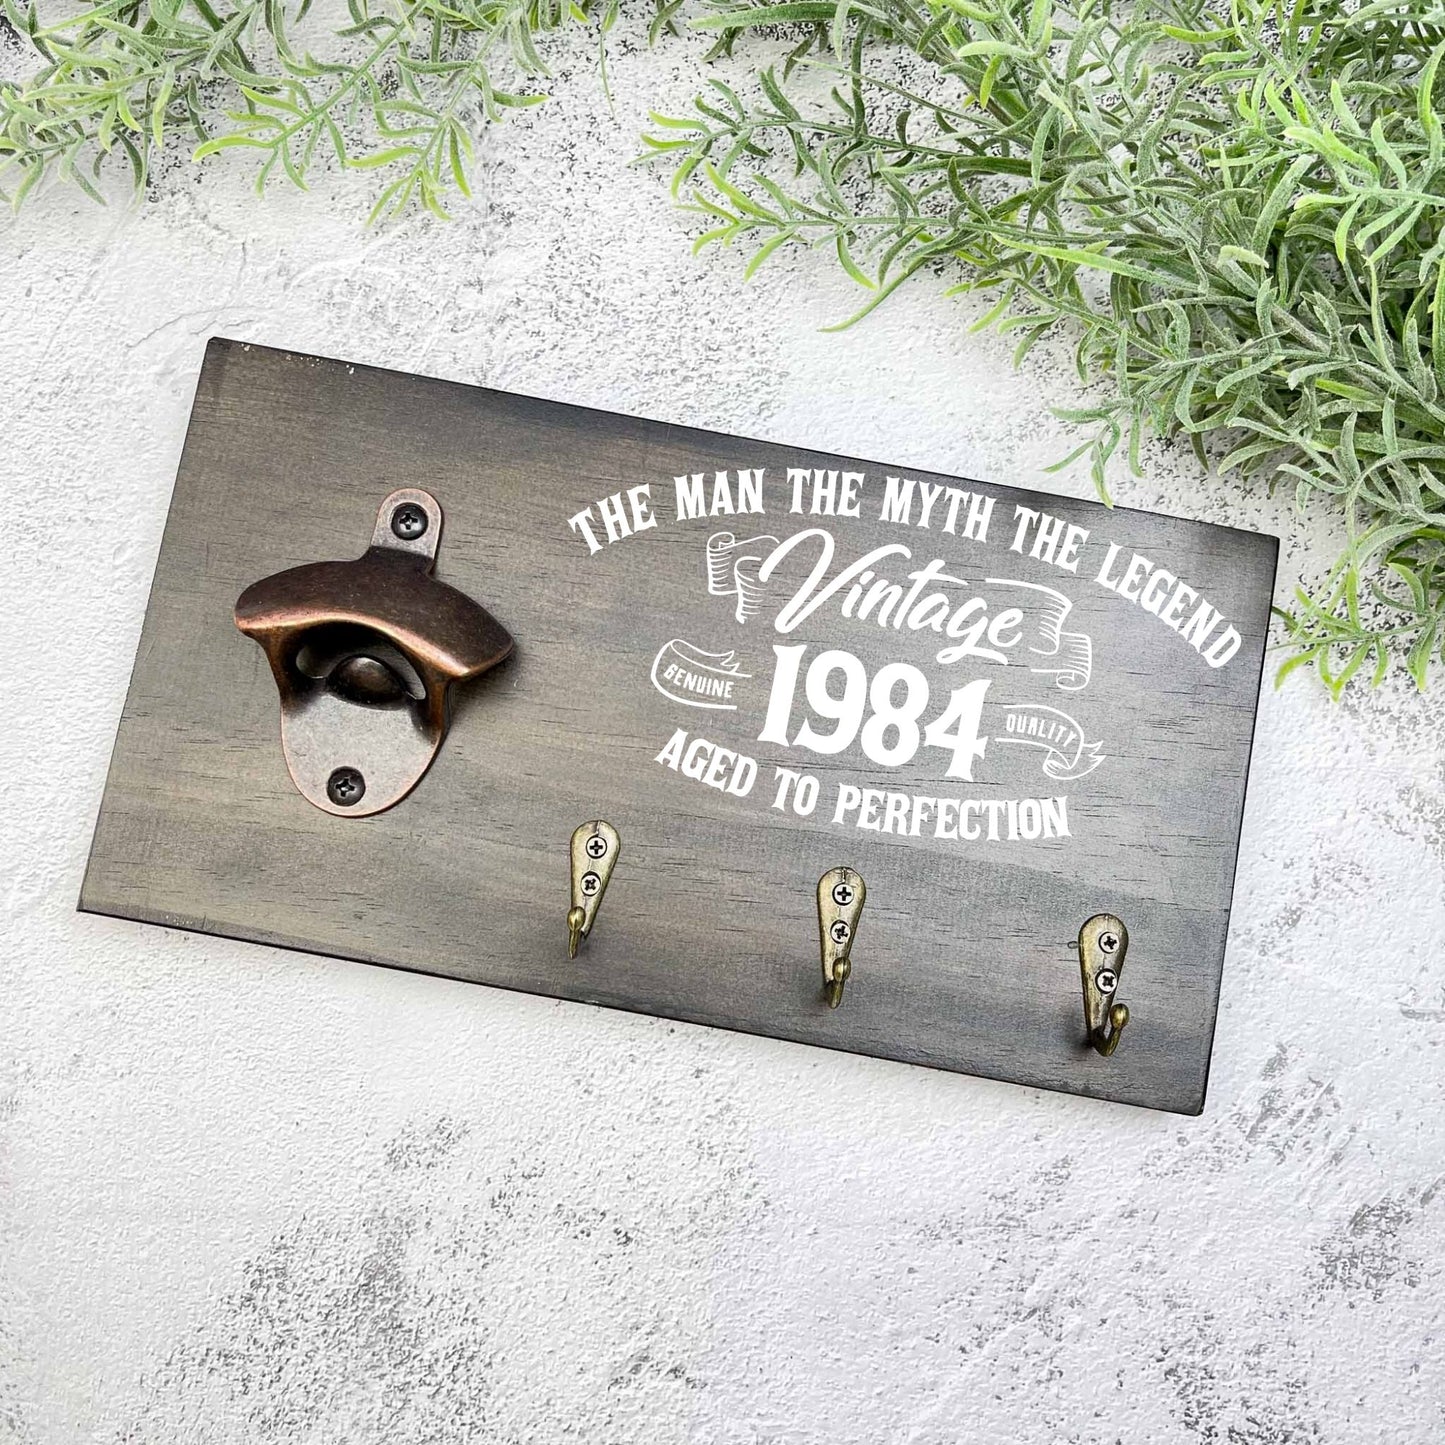 Man the myth the legend 40th Birthday beer sign, 1983 beer sign gift, 1984 birthday, 40th celebration, bottle opener sign